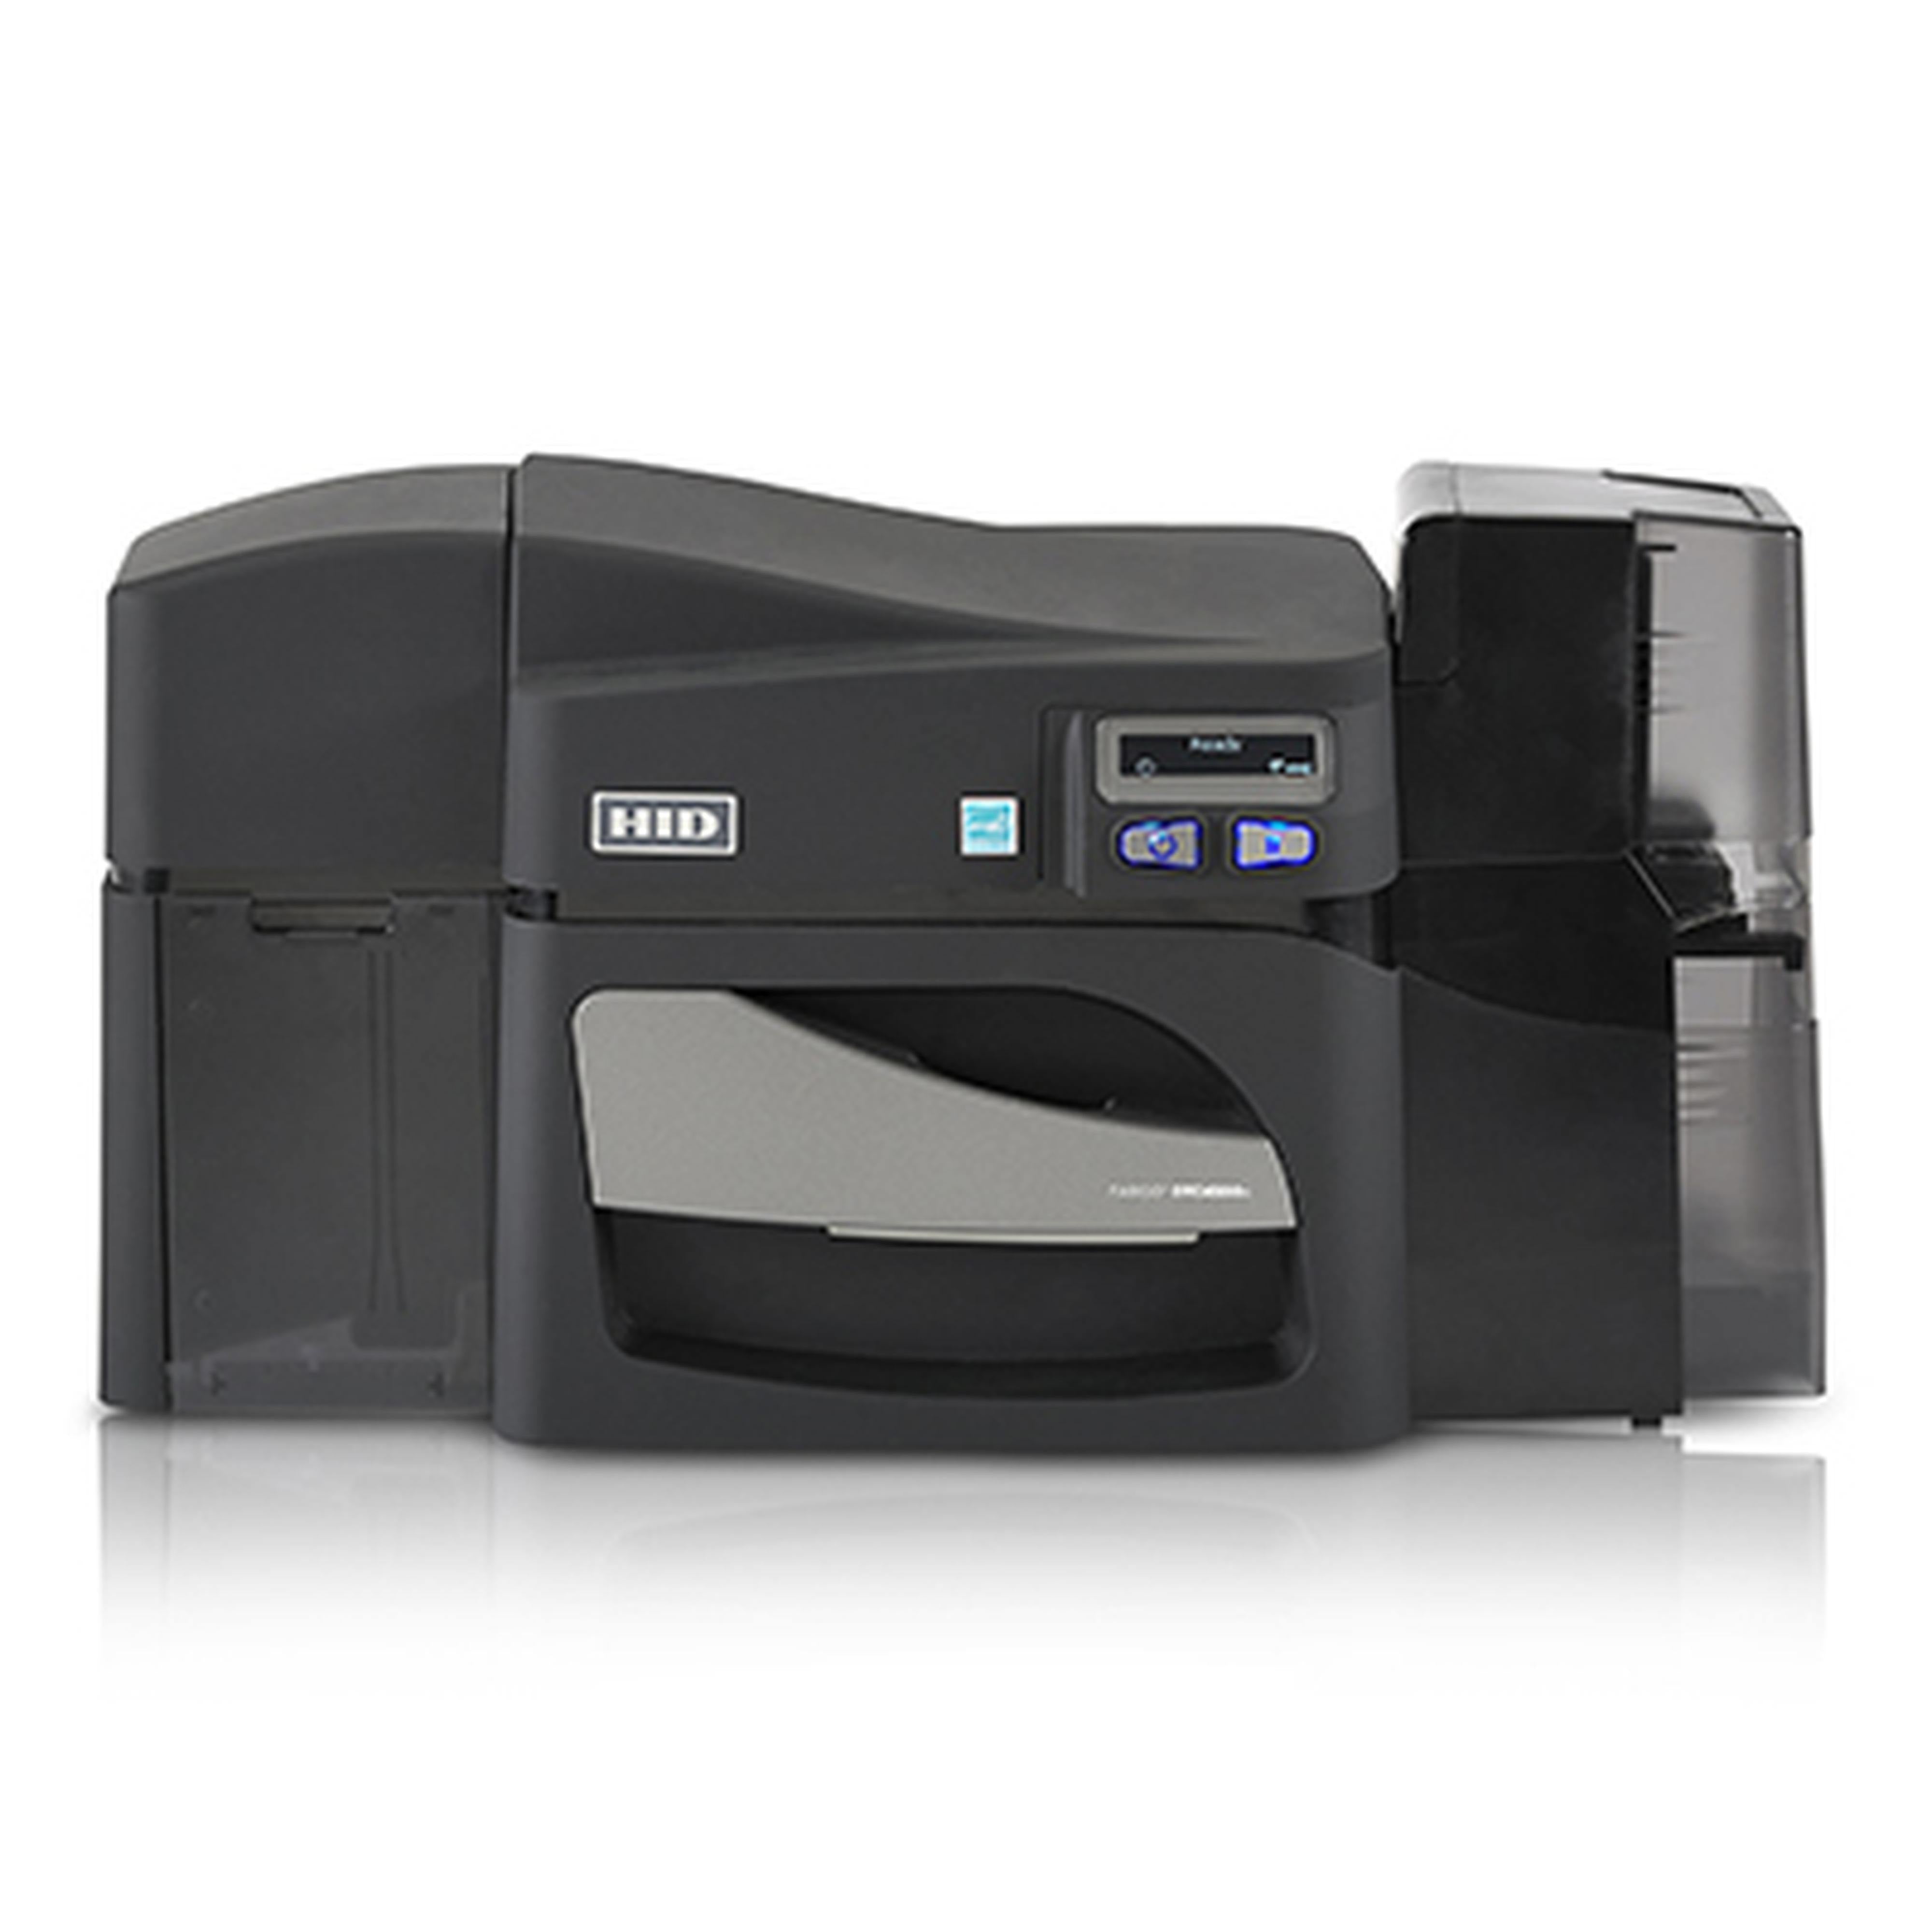 CD800 Direct-to-Card Printer with Card Lamination Module Support